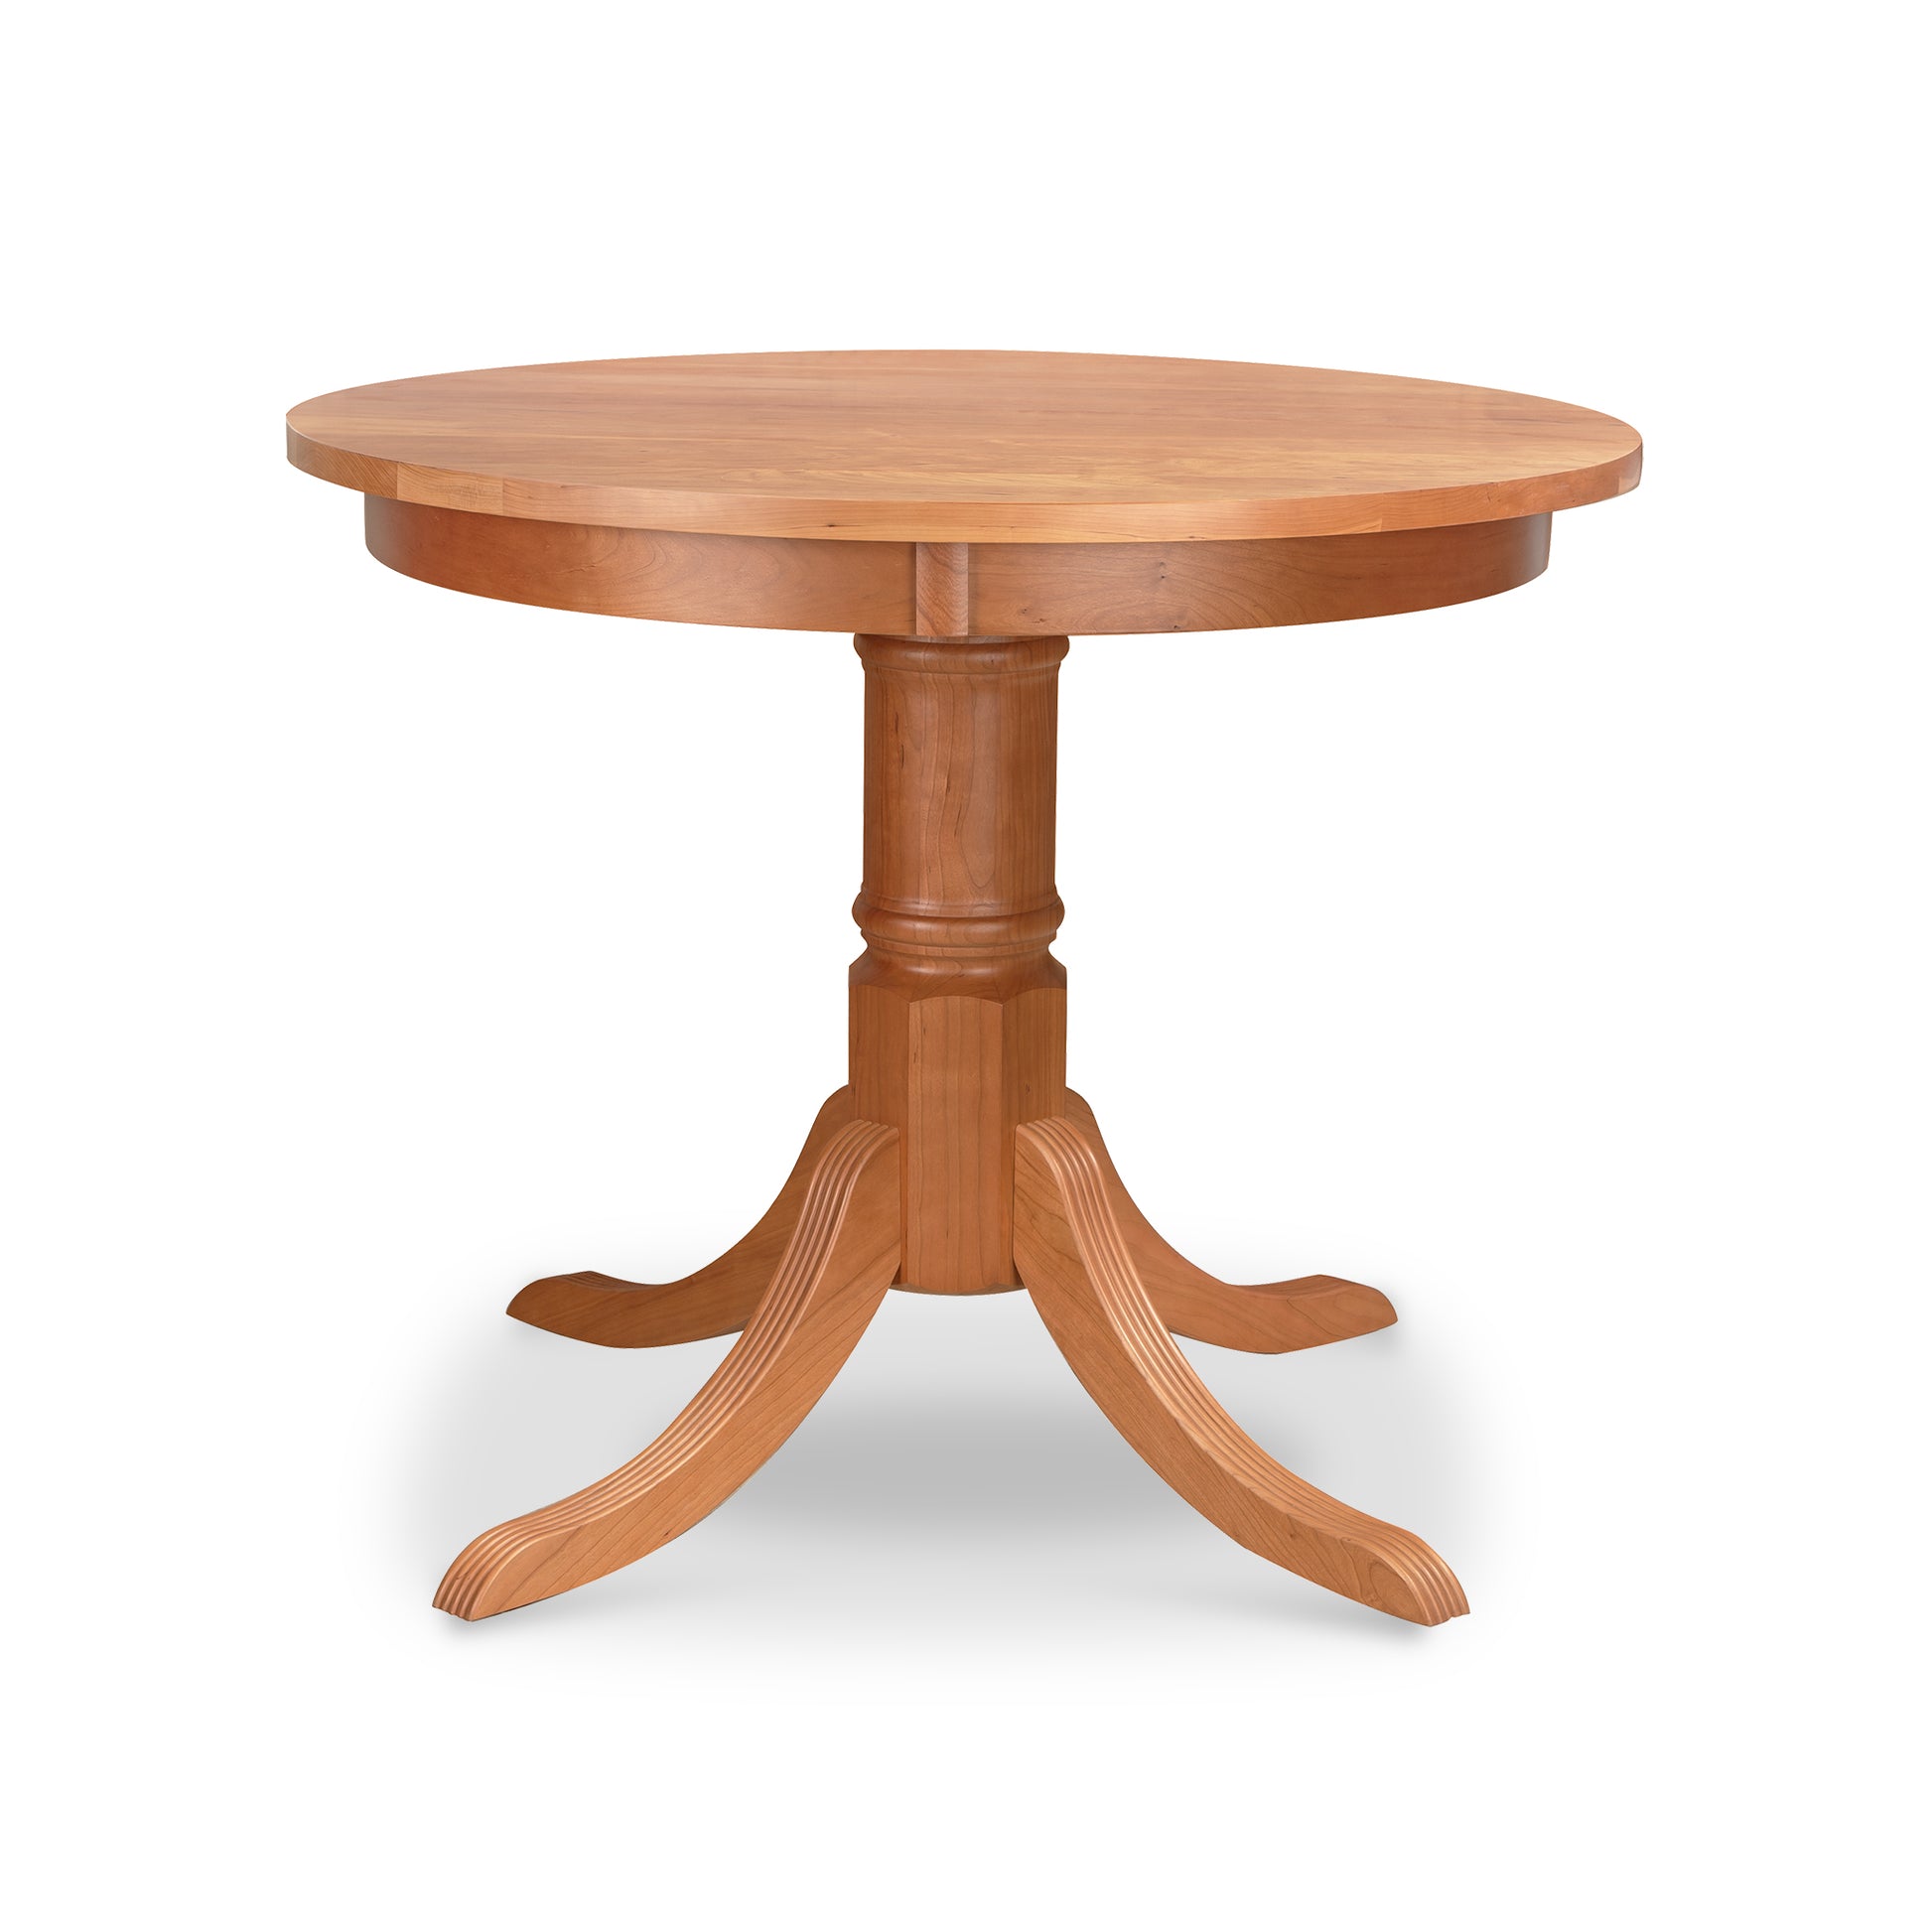 A Duncan-Phyfe Round Pedestal Dining Table with a hardwood base by Lyndon Furniture.